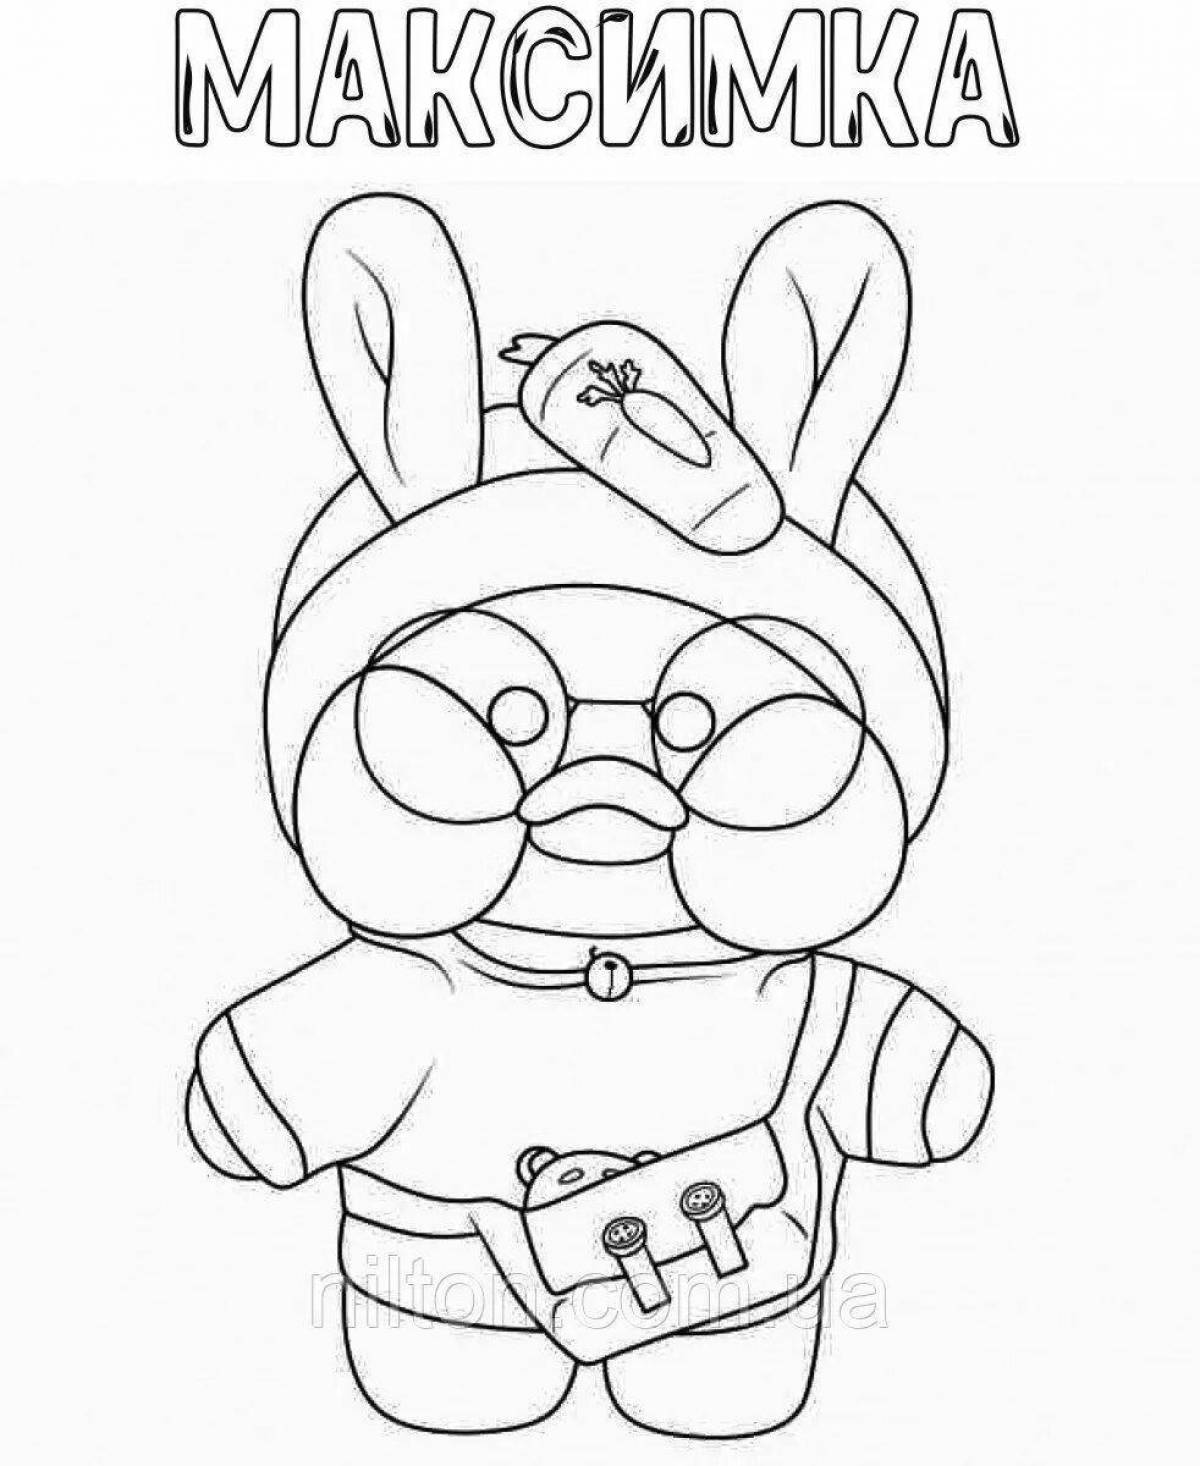 Adorable lalafanfan big duck coloring page